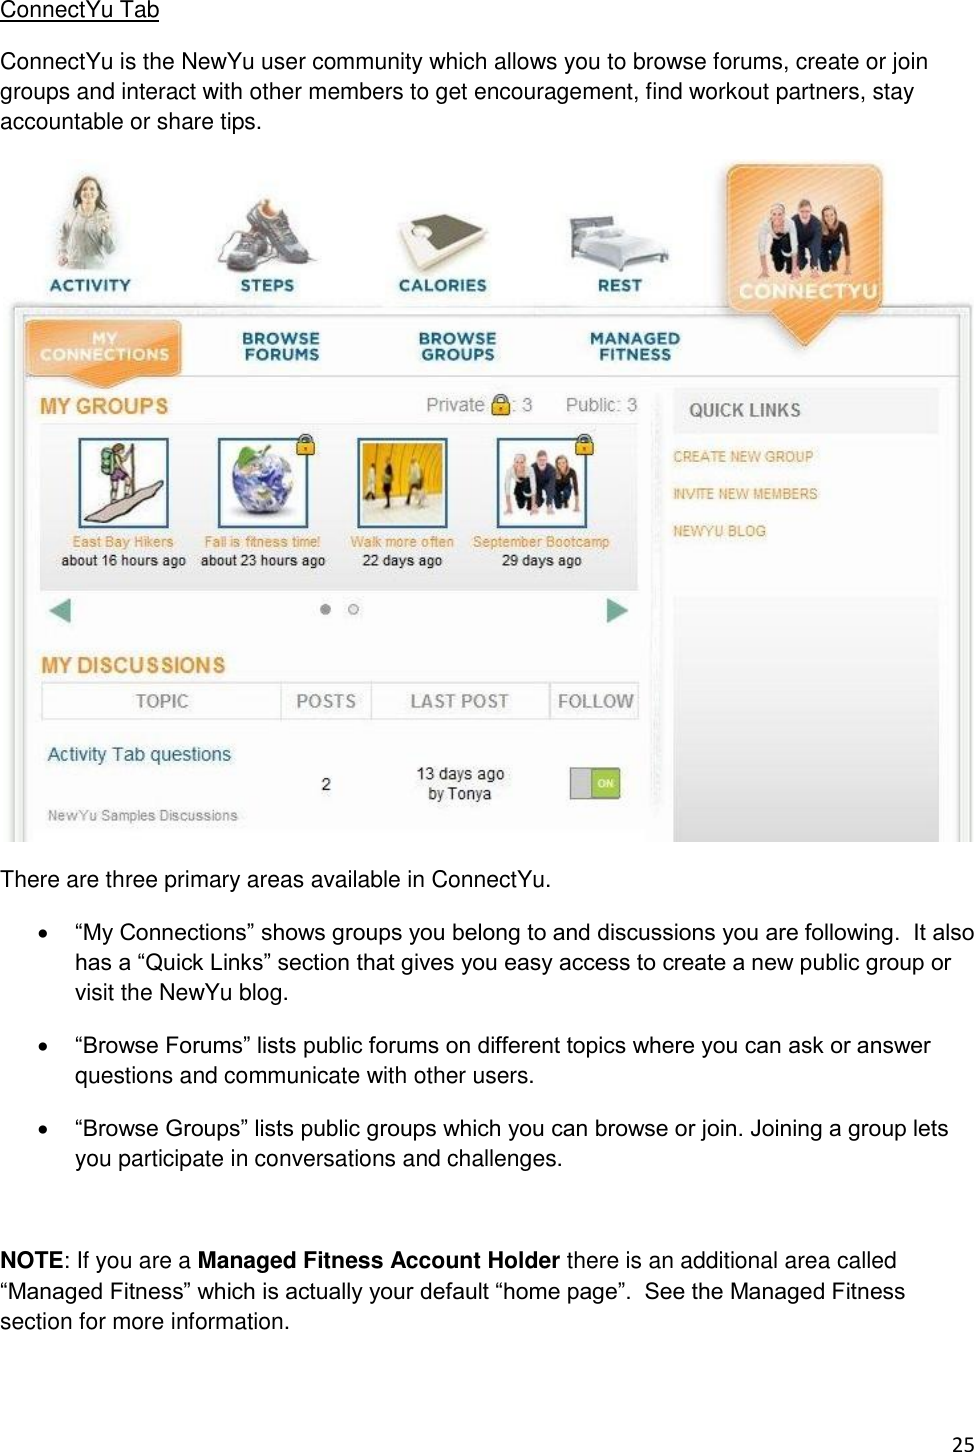 25 ConnectYu Tab ConnectYu is the NewYu user community which allows you to browse forums, create or join groups and interact with other members to get encouragement, find workout partners, stay accountable or share tips.  There are three primary areas available in ConnectYu.  “My Connections” shows groups you belong to and discussions you are following.  It also has a “Quick Links” section that gives you easy access to create a new public group or visit the NewYu blog.  “Browse Forums” lists public forums on different topics where you can ask or answer questions and communicate with other users.  “Browse Groups” lists public groups which you can browse or join. Joining a group lets you participate in conversations and challenges.  NOTE: If you are a Managed Fitness Account Holder there is an additional area called “Managed Fitness” which is actually your default “home page”.  See the Managed Fitness section for more information.  